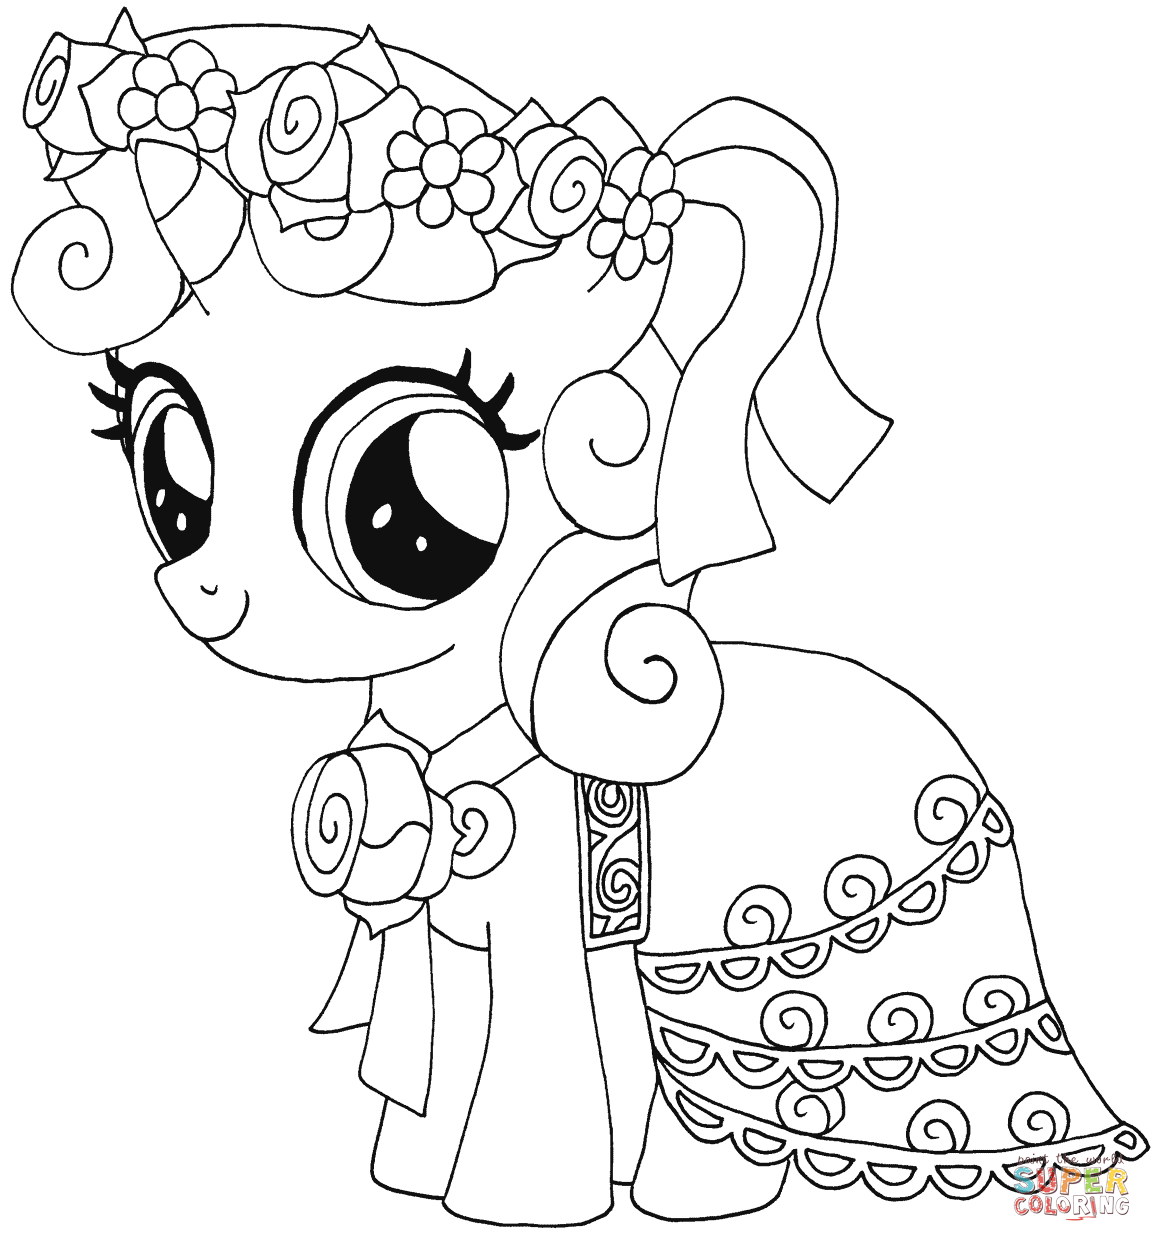 My Little Pony coloring pages | Free Coloring Pages